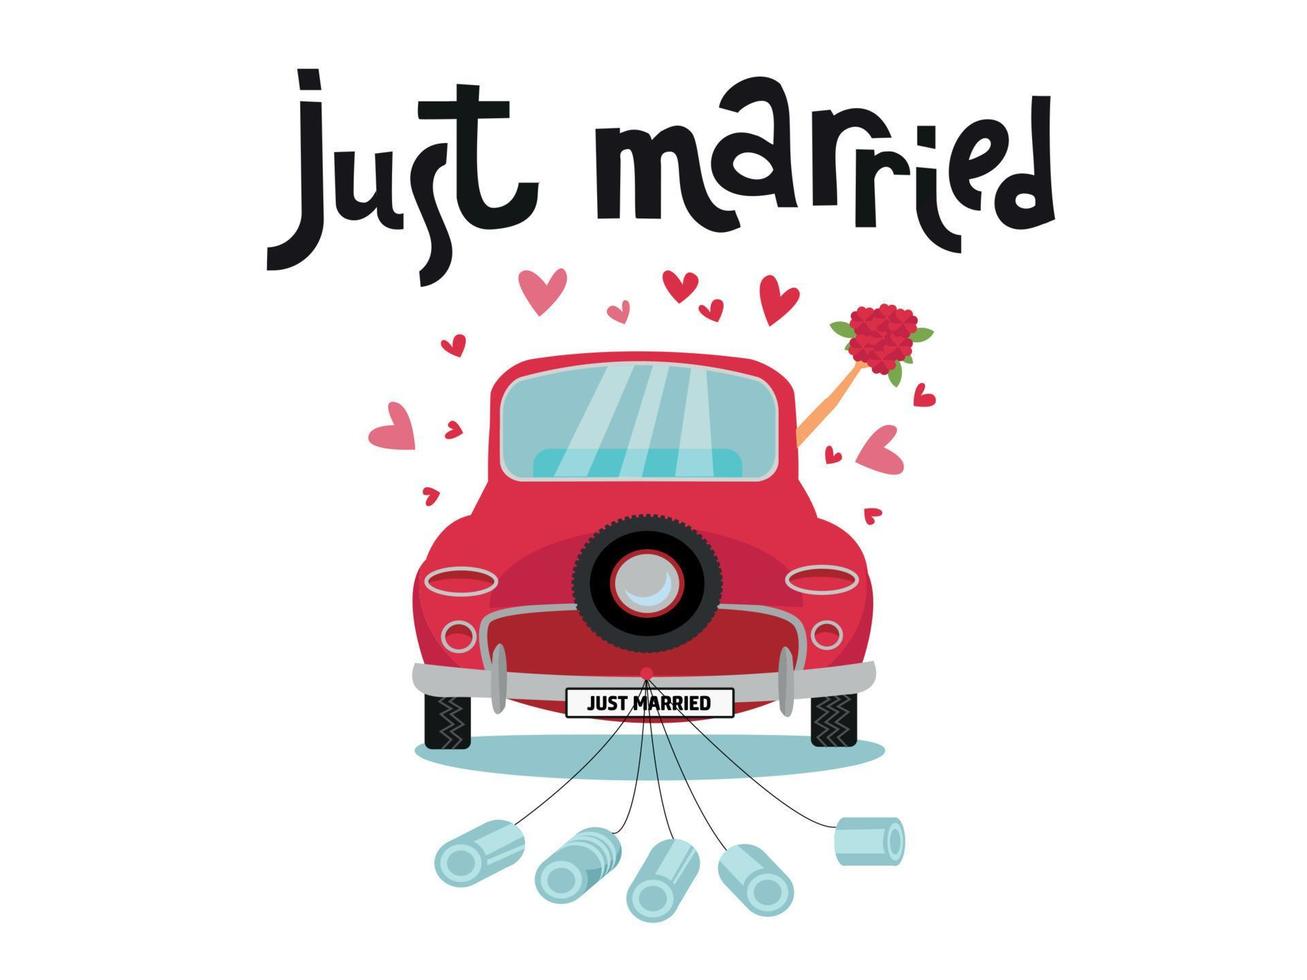 Newlywed couple is driving a vintage convertible car for their honeymoon with just married sign and cans attached. Just married red car with the bride and groom. Vector flat cartoon illustration